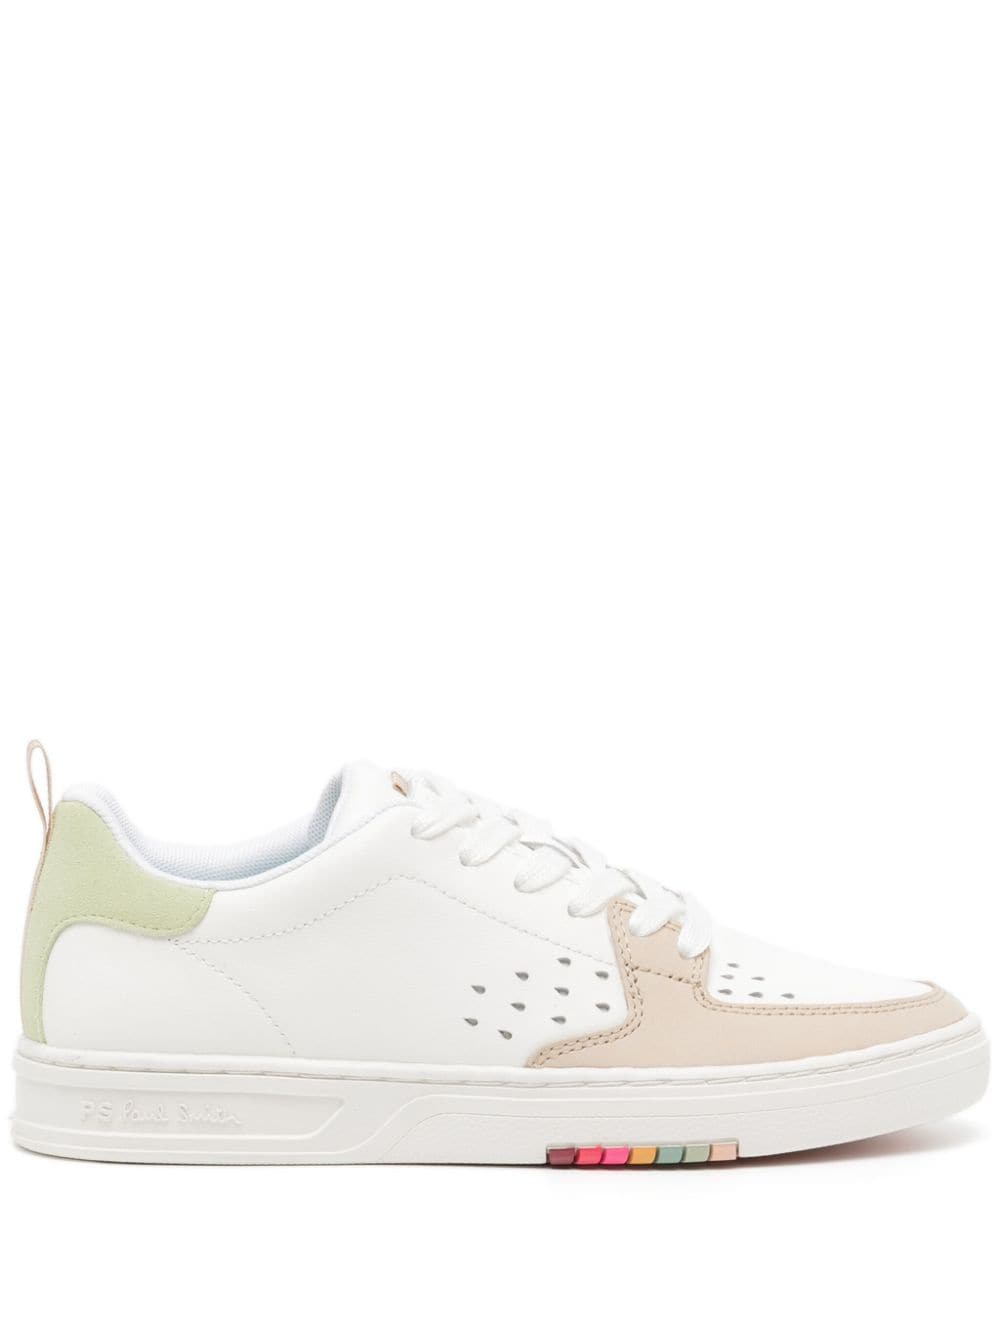 Paul Smith Cosmo Leather Sneakers In White